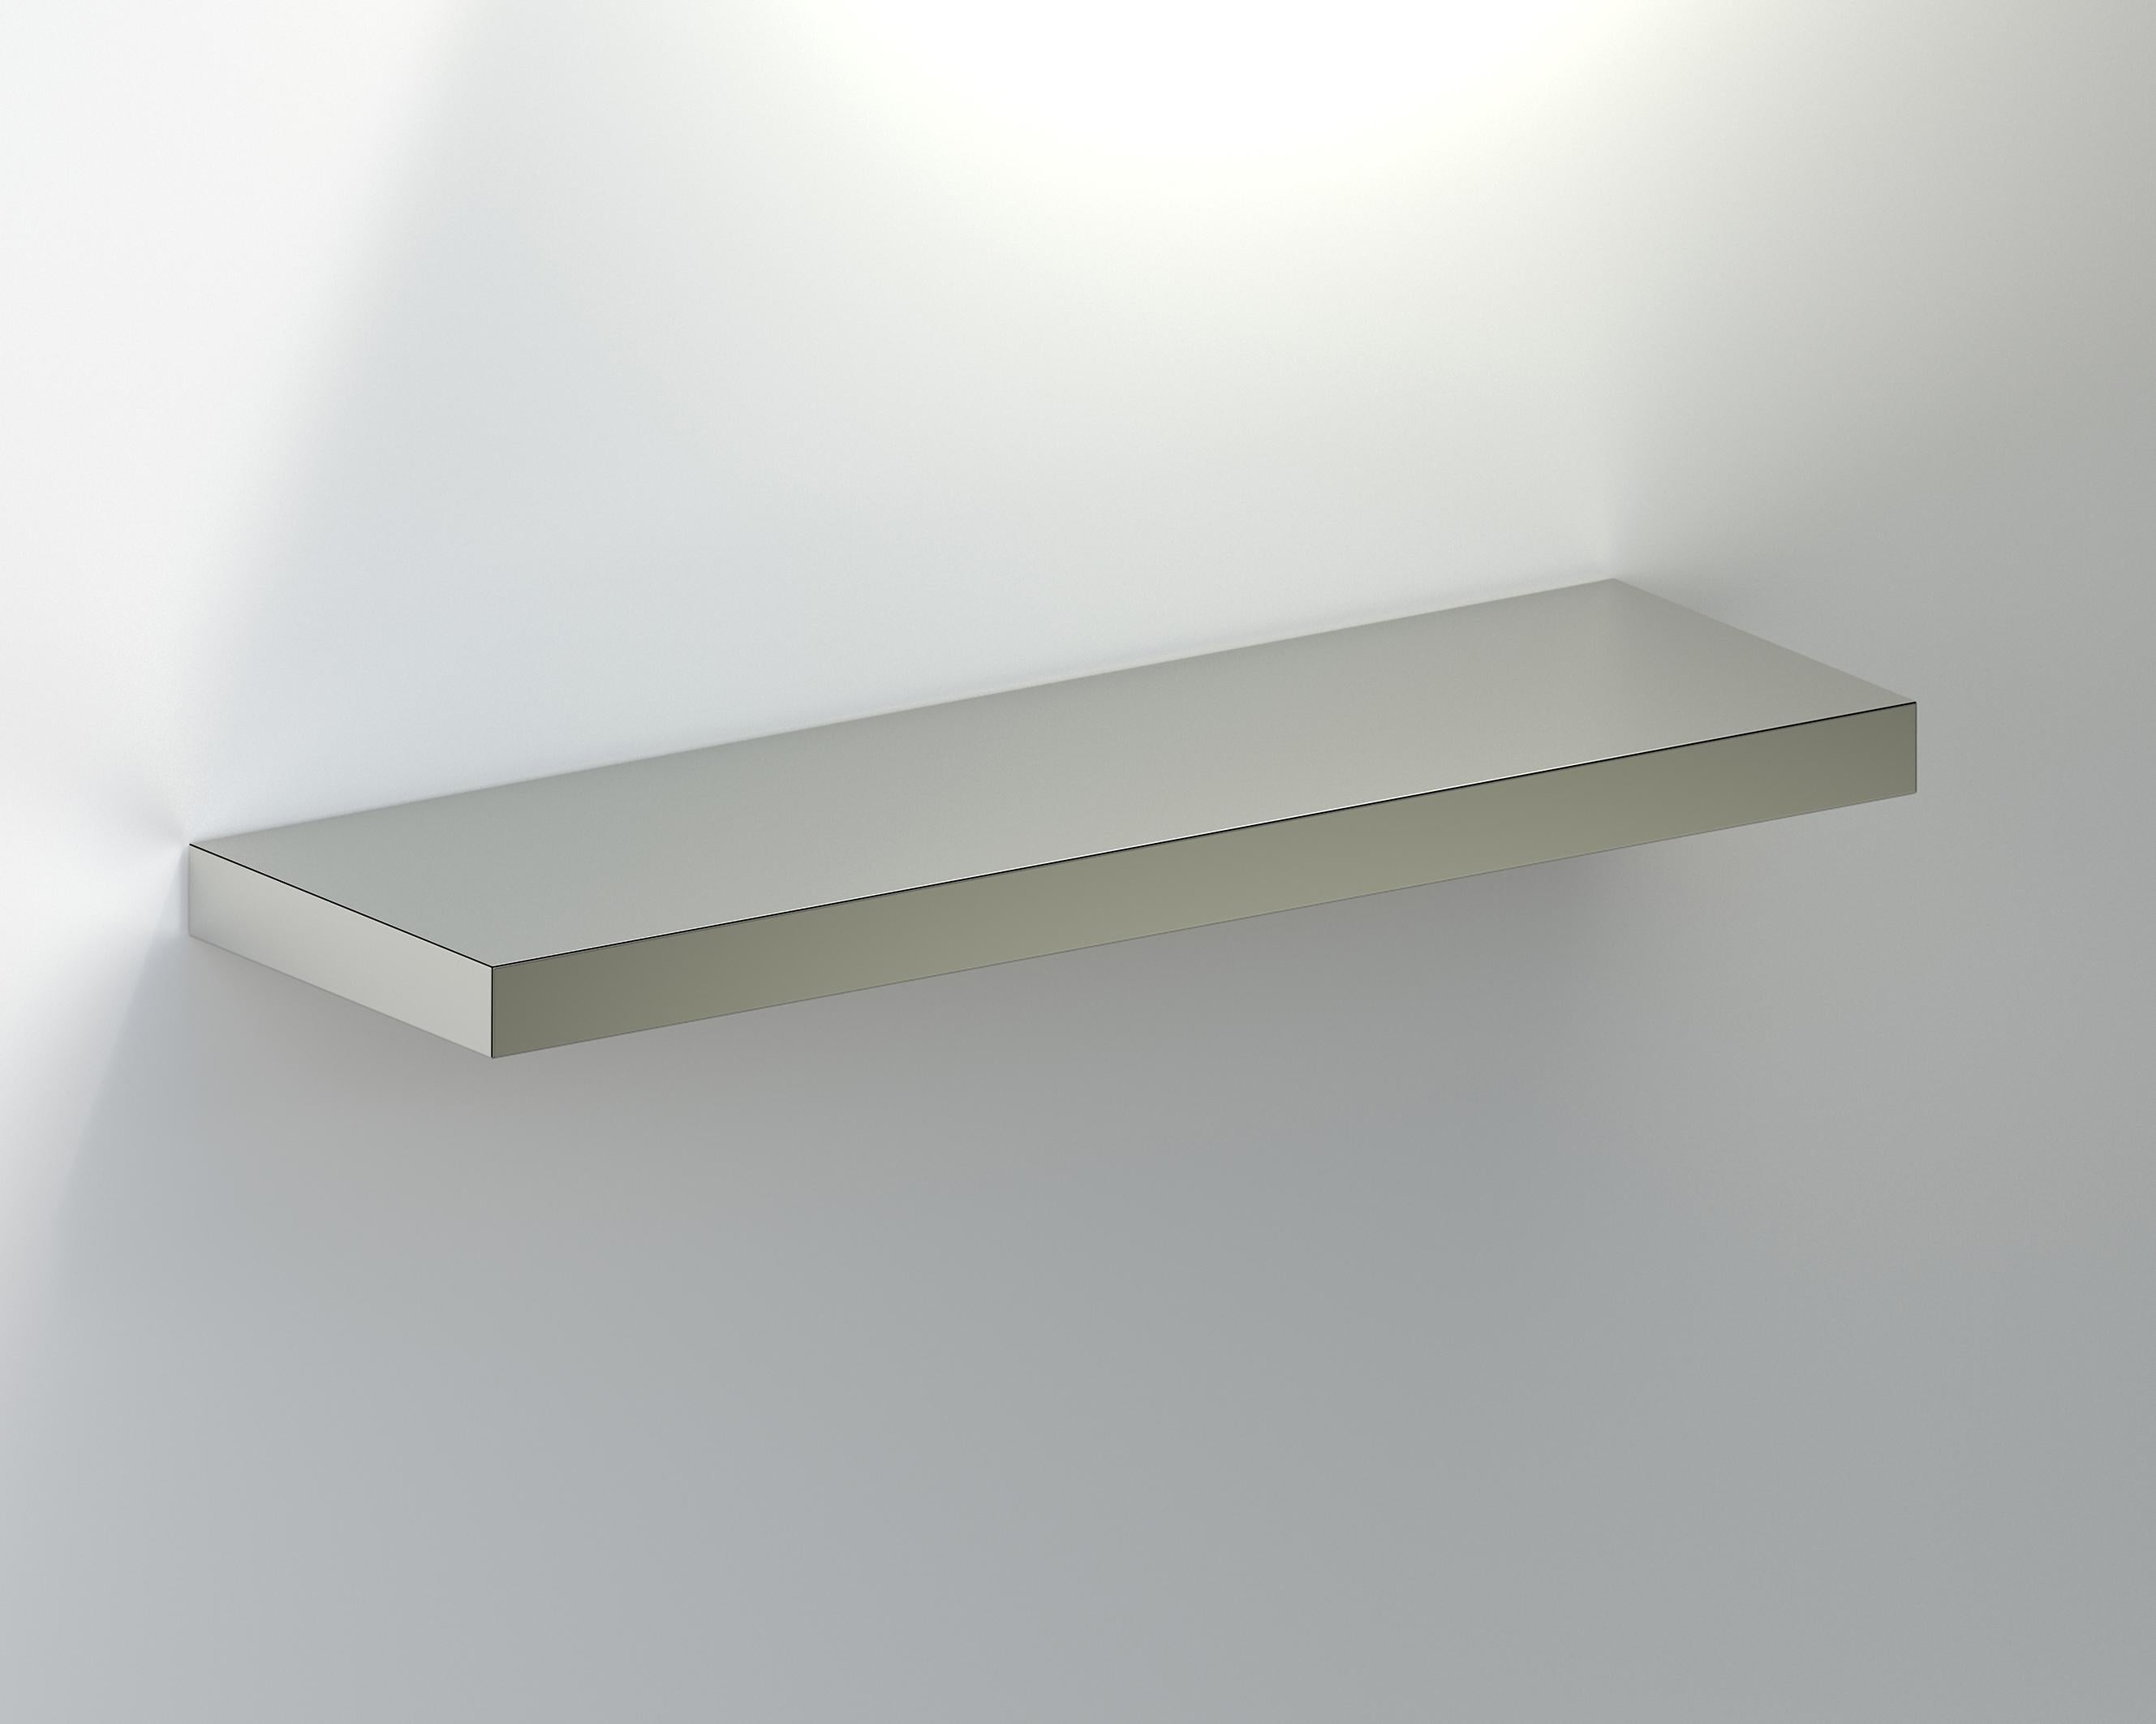 Hitan Shelf is a floating decorative shelf entirely covered by HPL Aluminium.
The manufacturing process and research on metal surfaces treatment and finishing allows highlighting the shine and brightness of aluminum.

Hitan is entirely